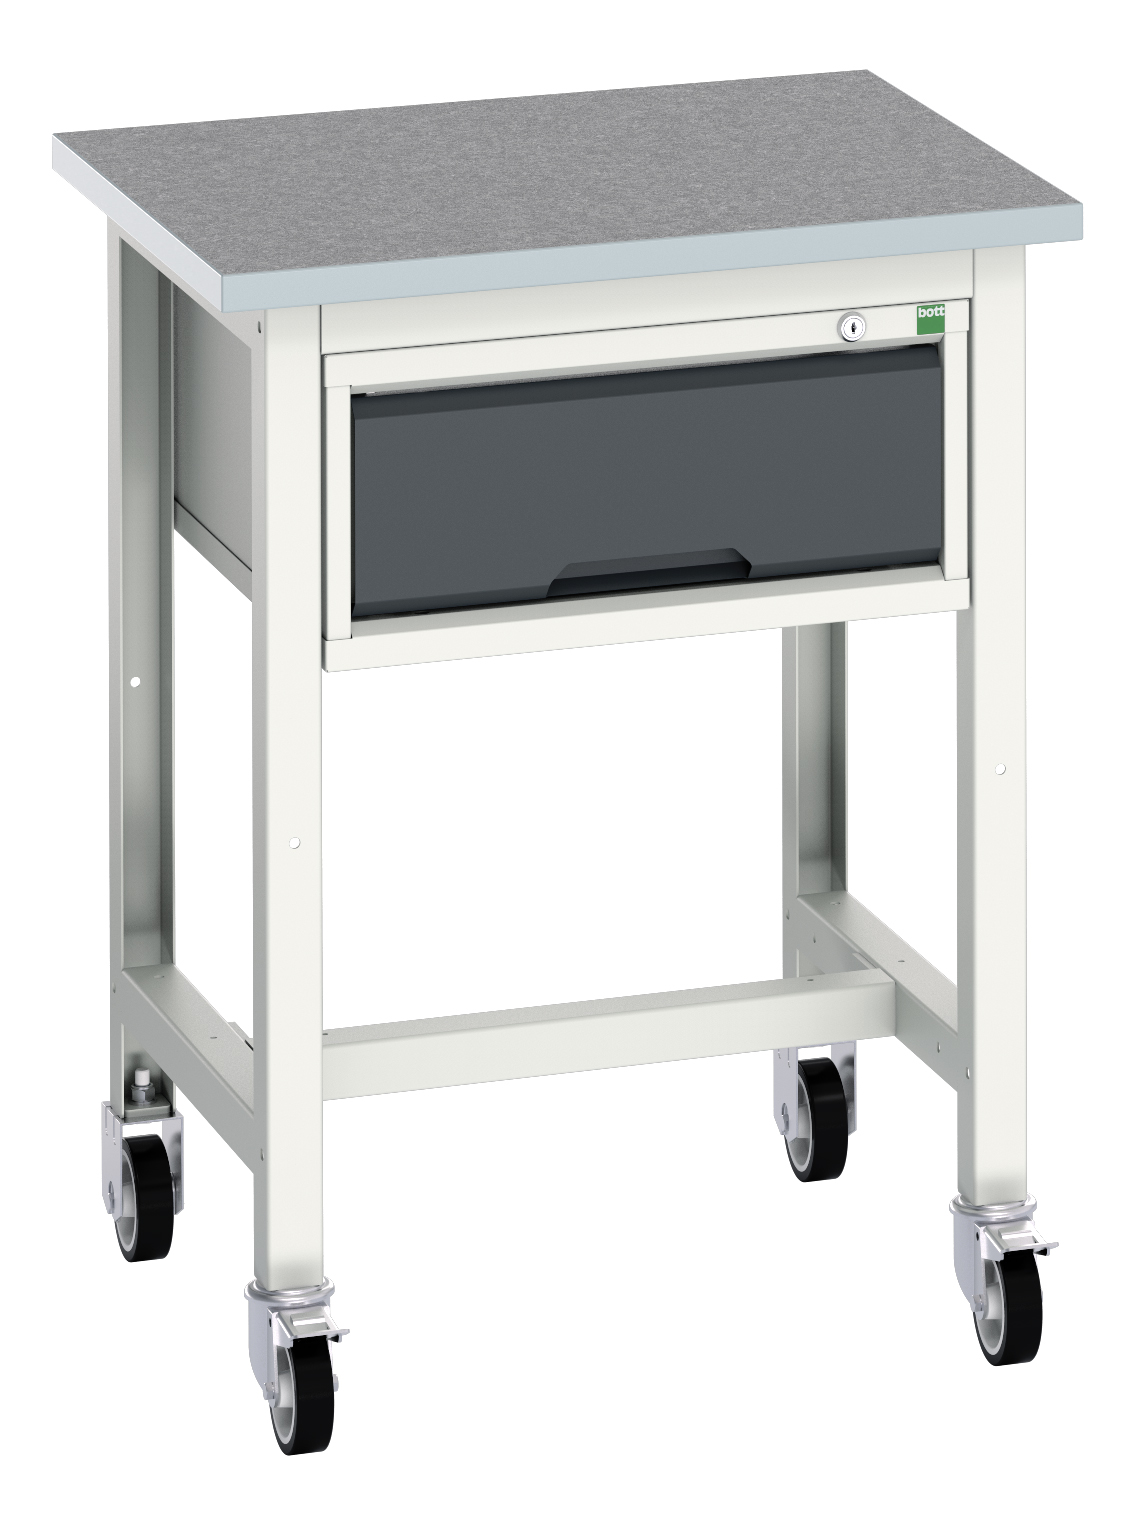 Bott Verso Mobile Workstand With 1 Drawer Cabinet - 16922201.19